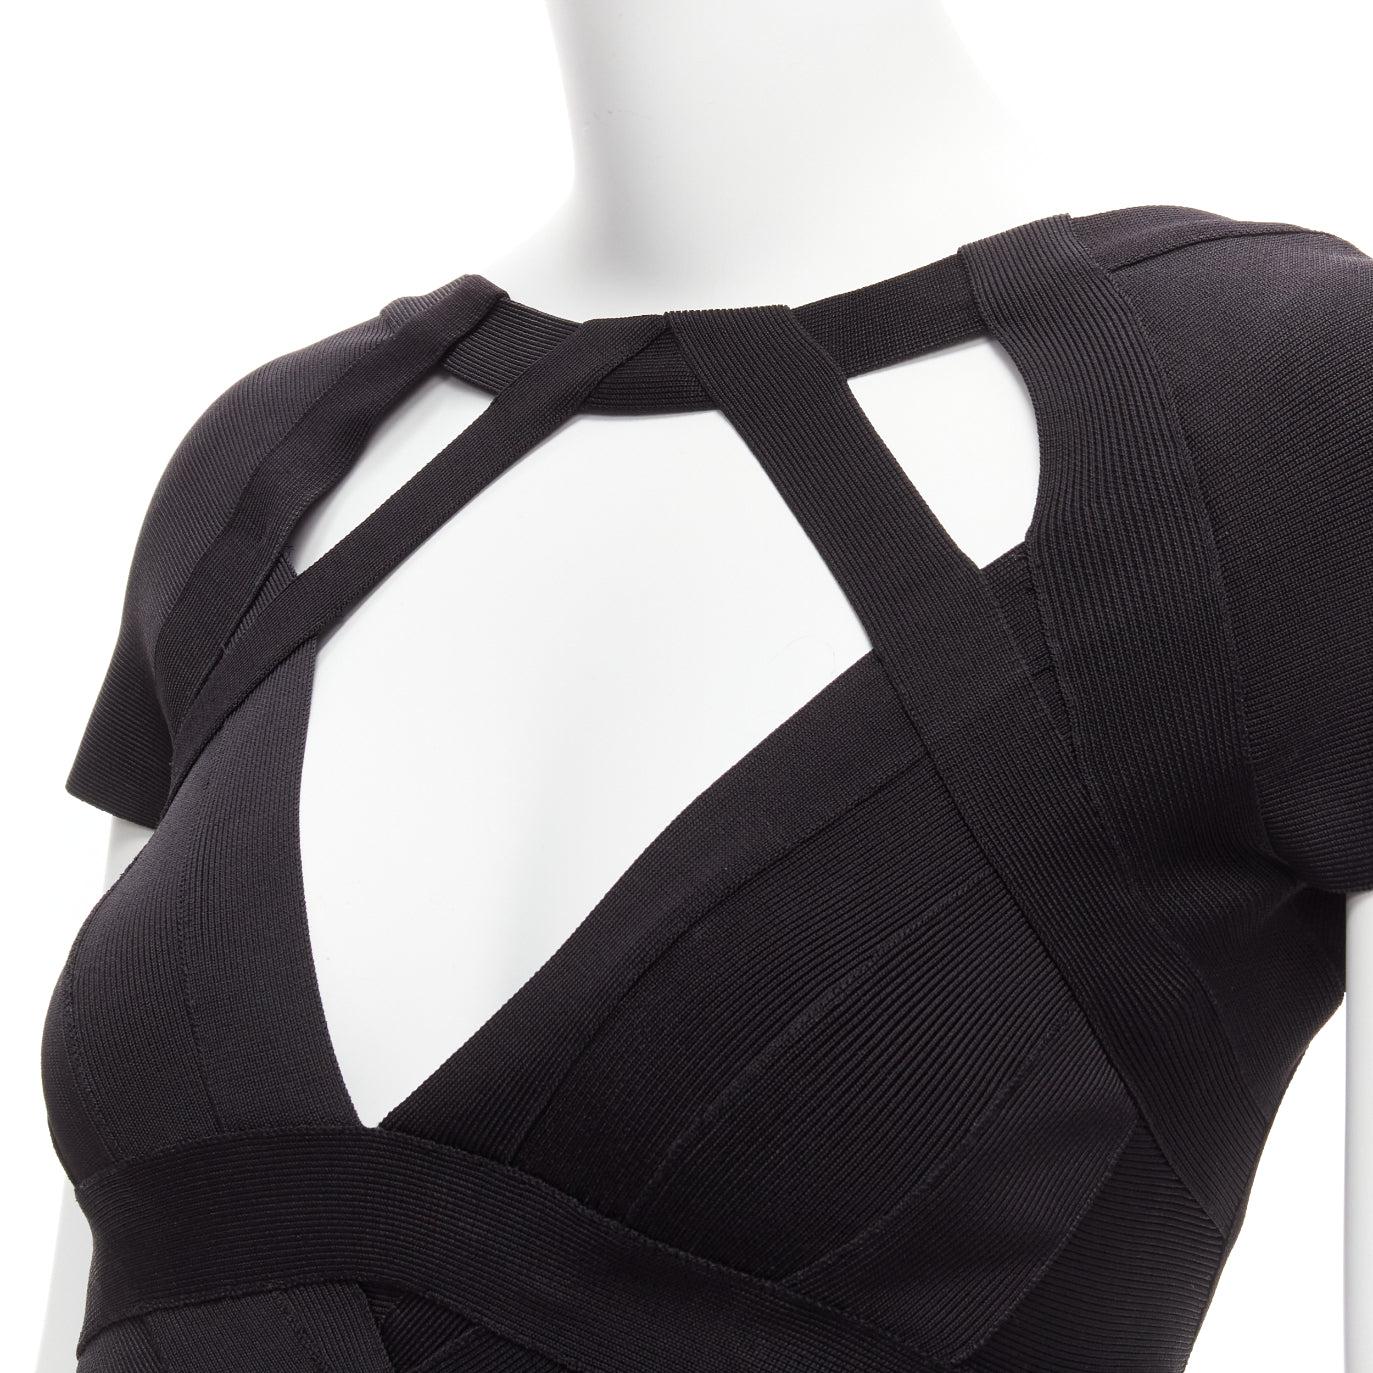 HERVE LEGER black V neck cut out chest cap sleeve bodycon bandage top XS
Reference: MEKK/A00016
Brand: Herve Leger
Material: Rayon, Blend
Color: Black
Pattern: Solid
Closure: Zip
Extra Details: Back zip.
Made in: China

CONDITION:
Condition: